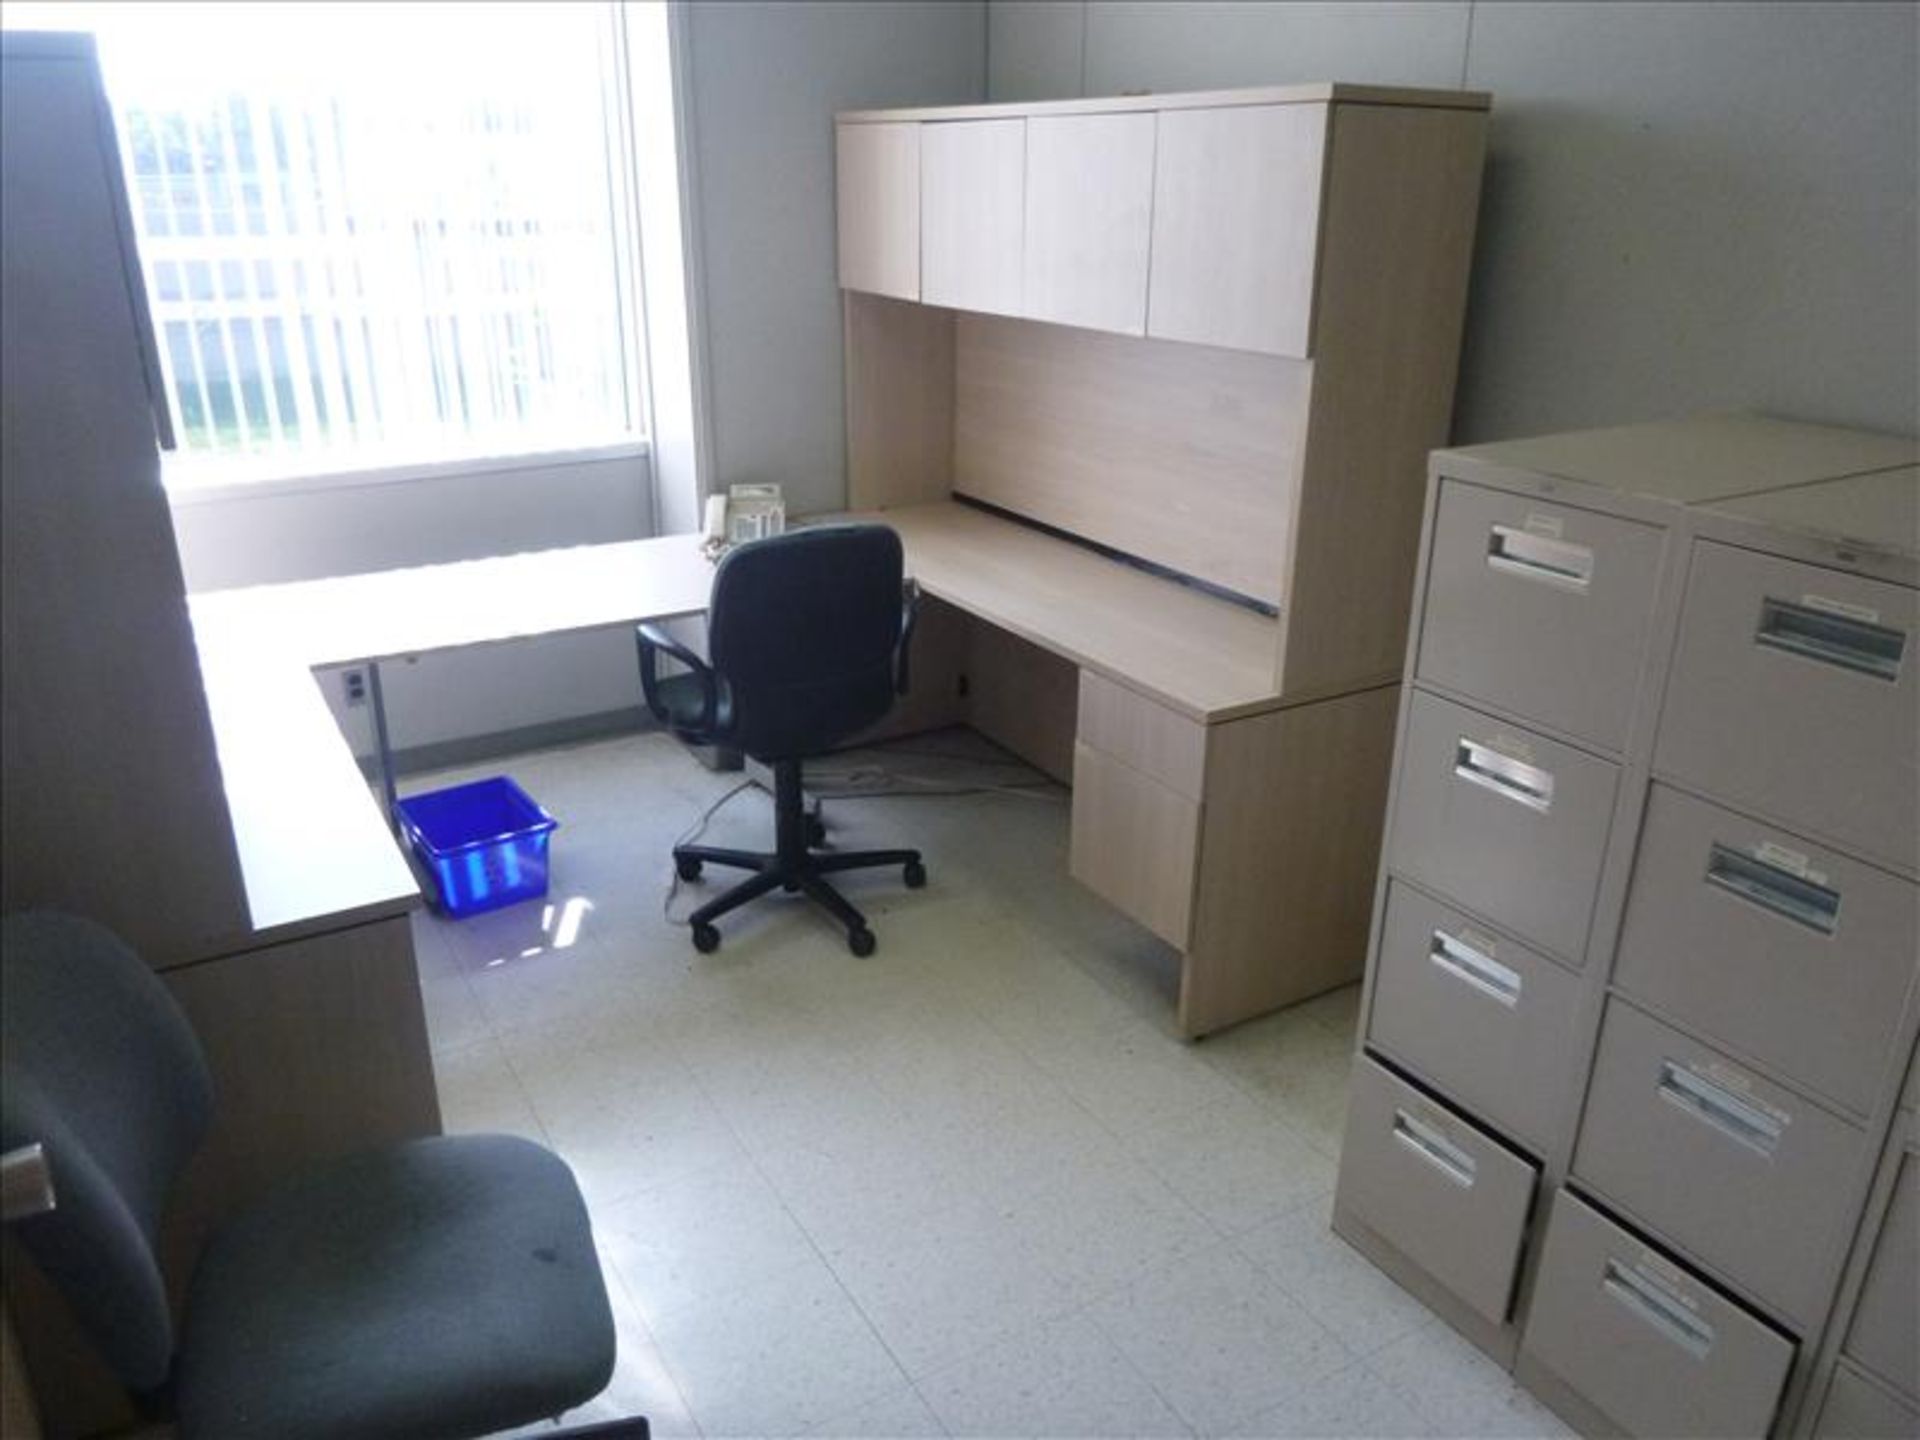 Office No. 1 (D.R.) - office furniture contents only (located at 150 Bartor Rd Toronto ON Canada)